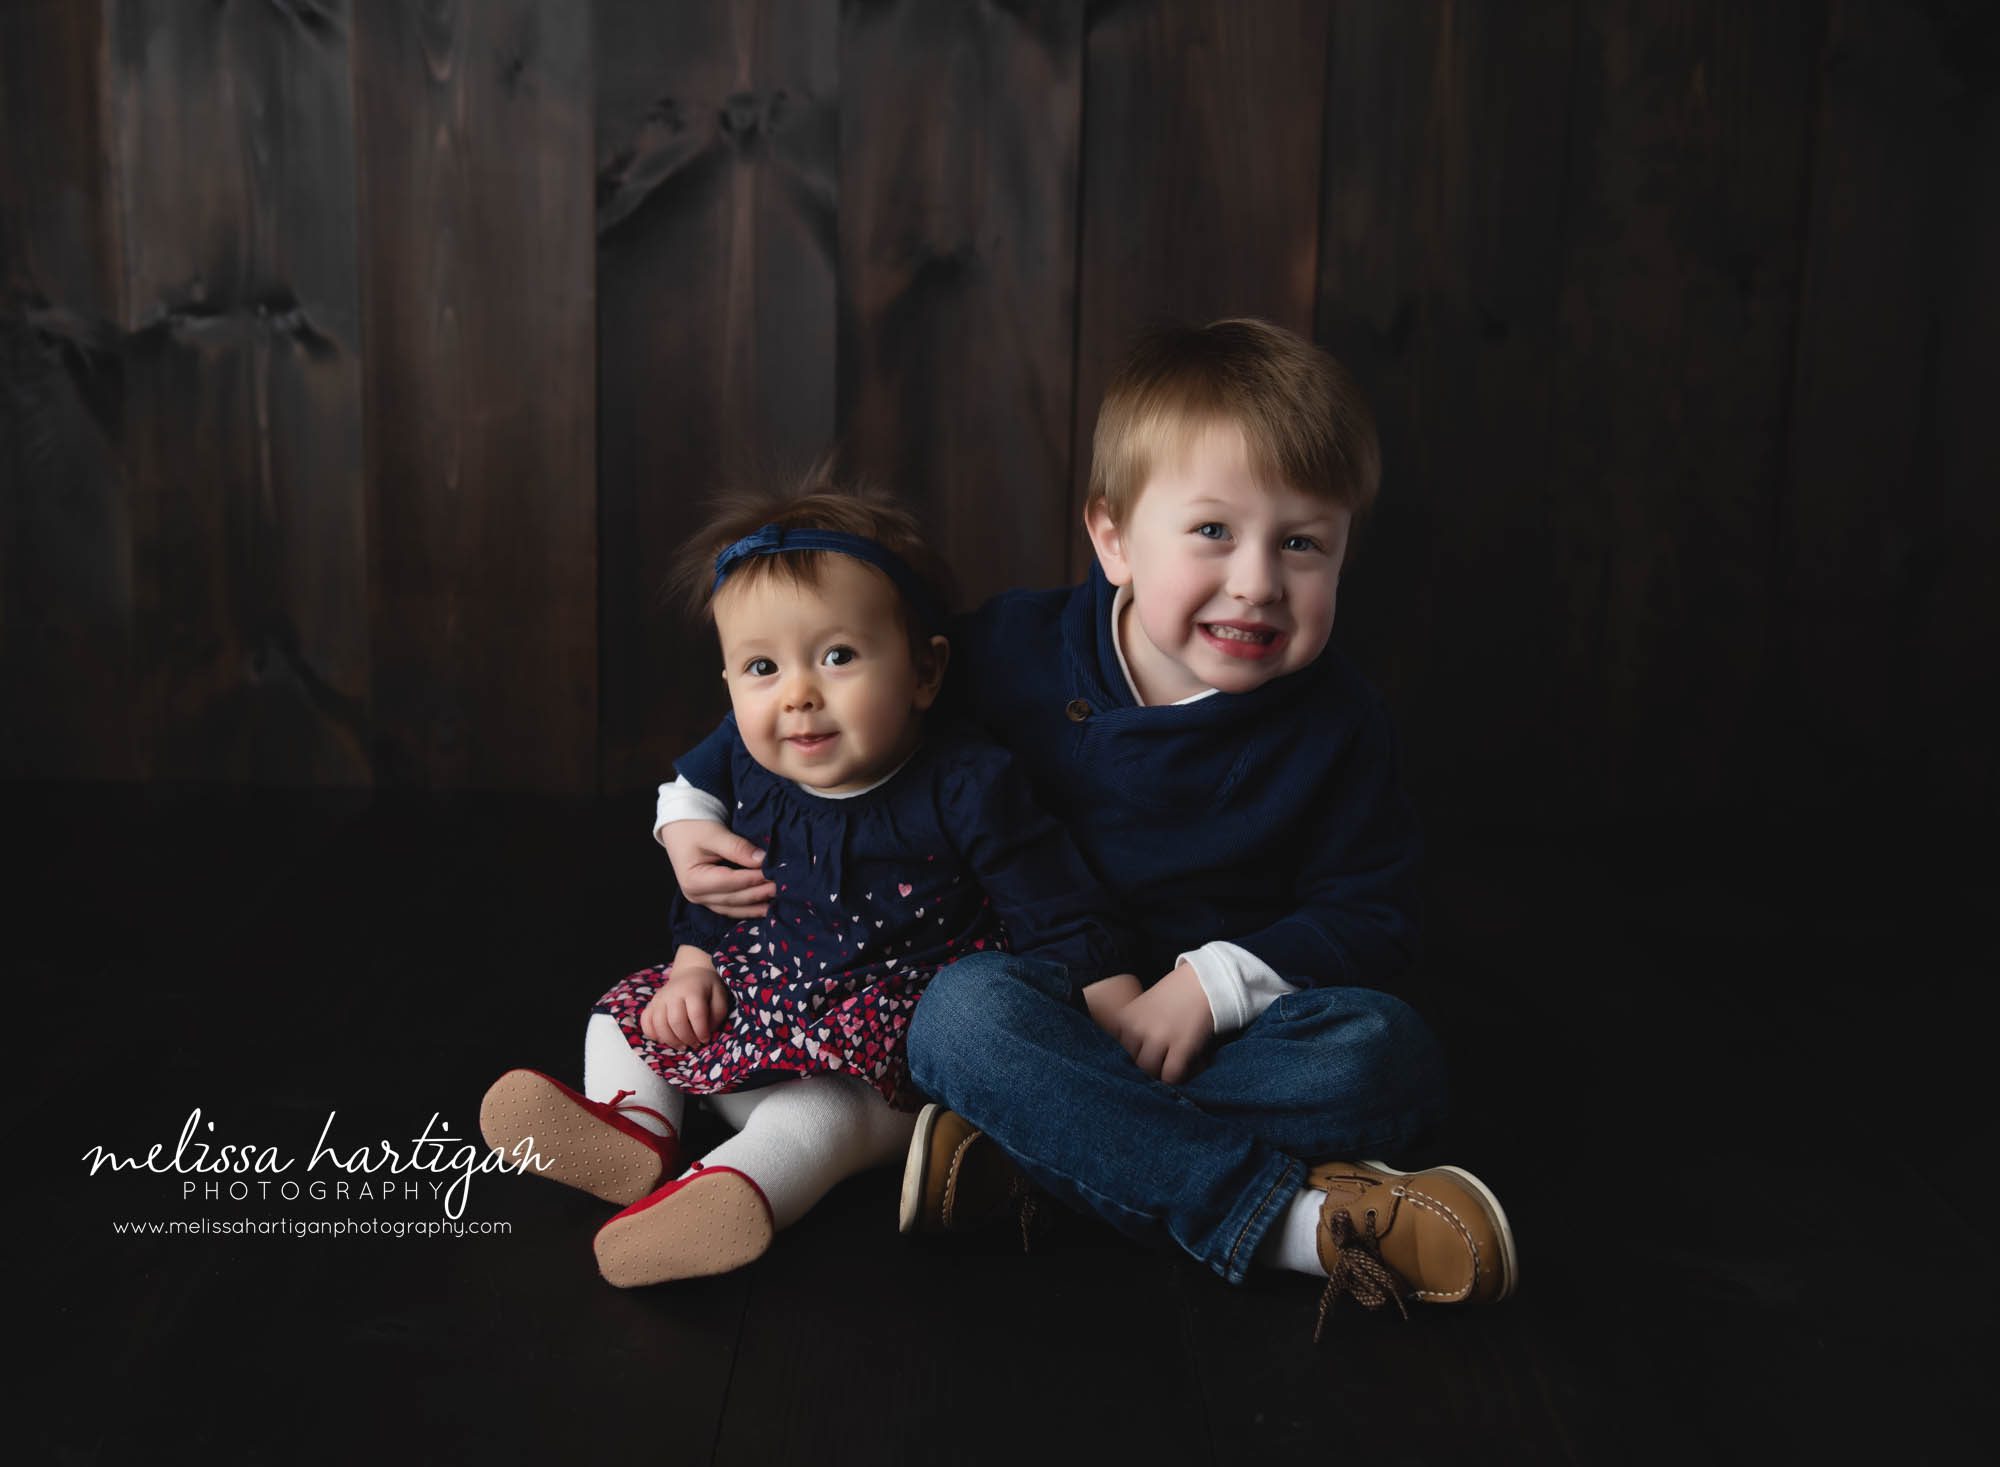 Baby girl sitting in studio with toddler big brother sitting beside her with his arm around her